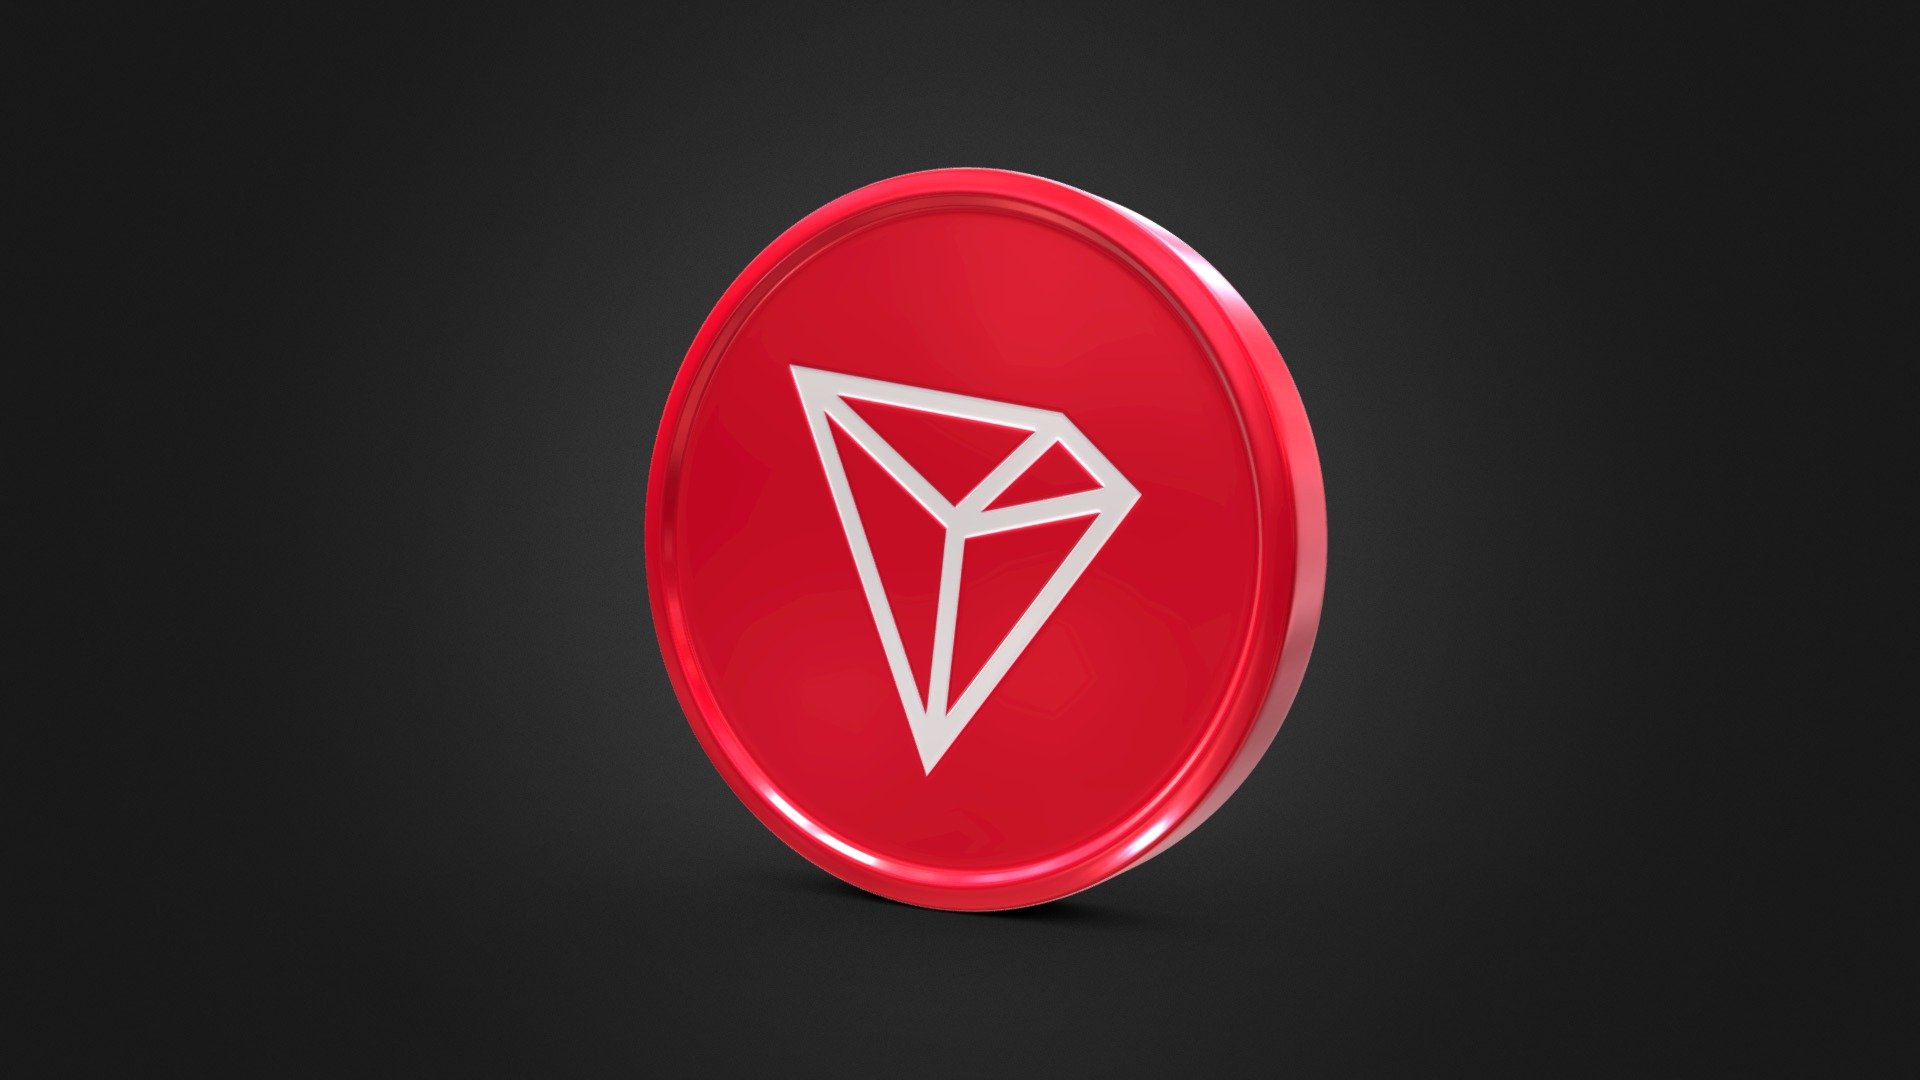 Based on TRON Brand &amp; Press web page. Following the communication guide of TRON Ecosystem 3d model